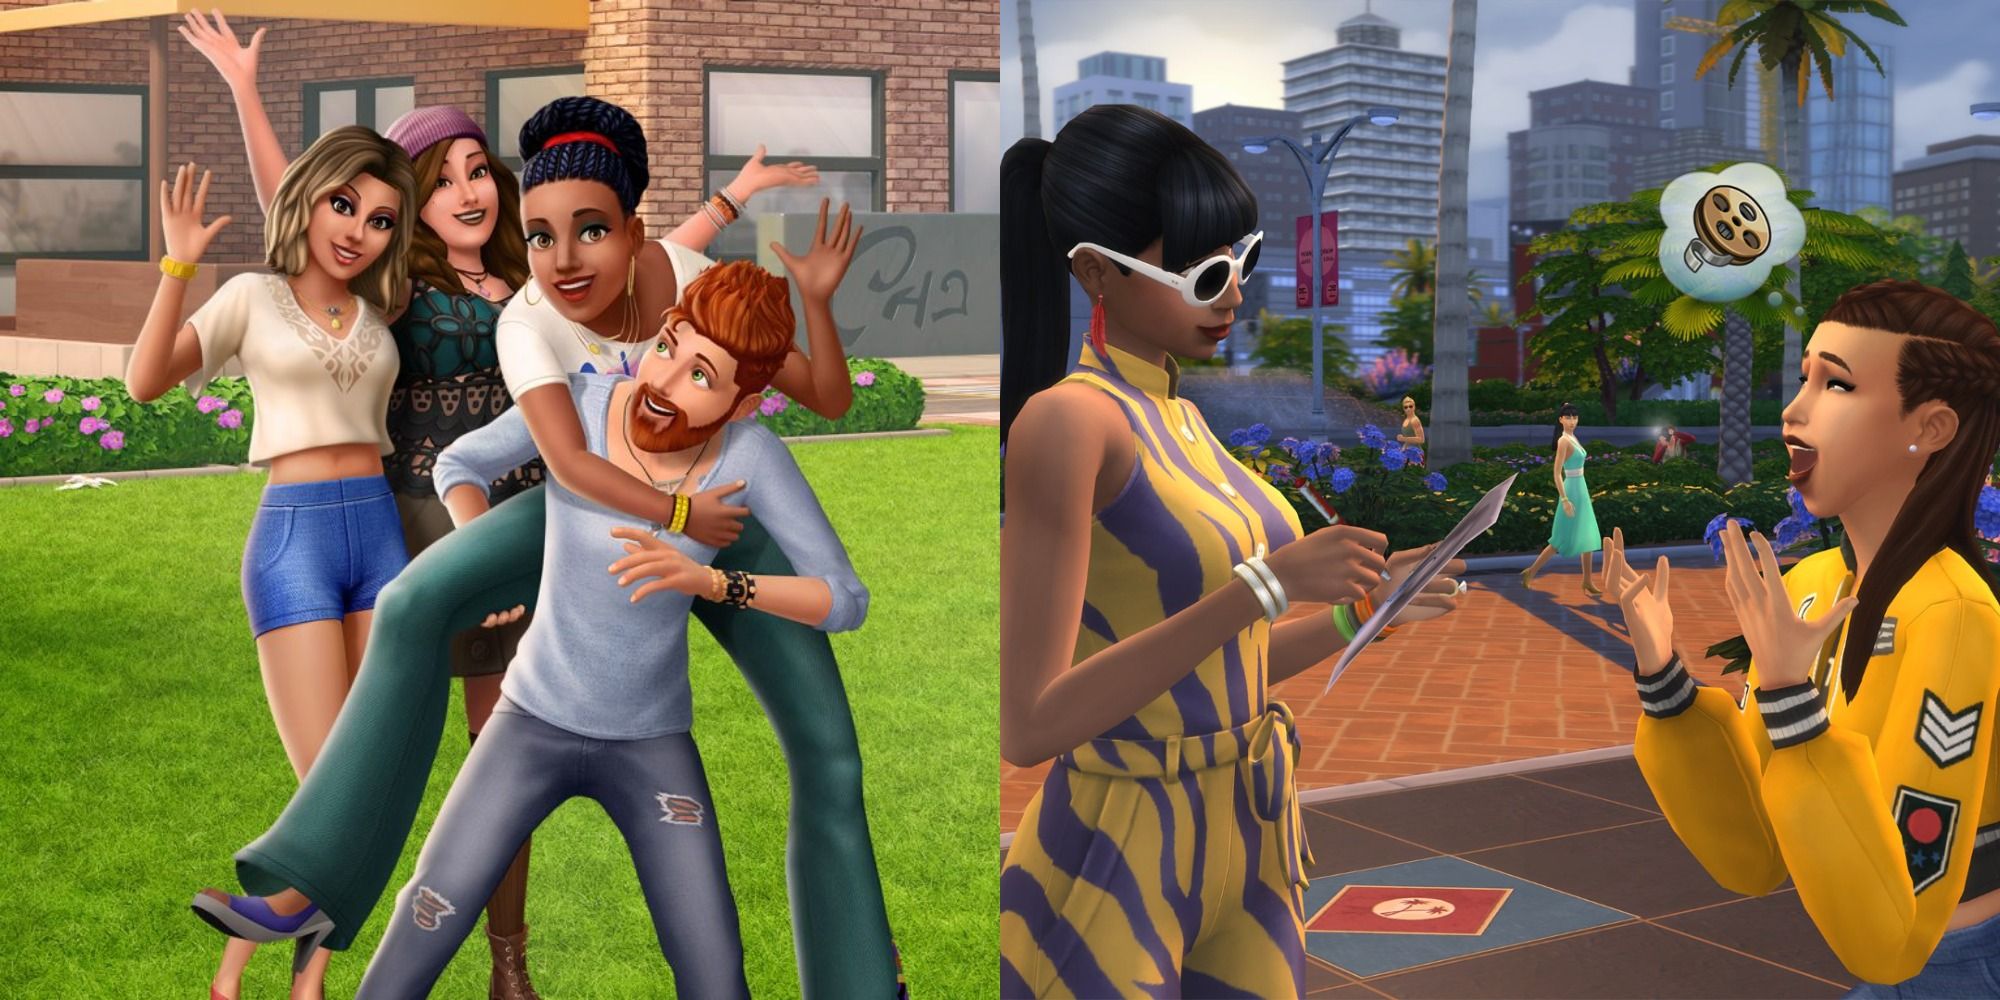 A split image of the Sims characters in the game talking and laughing with each other